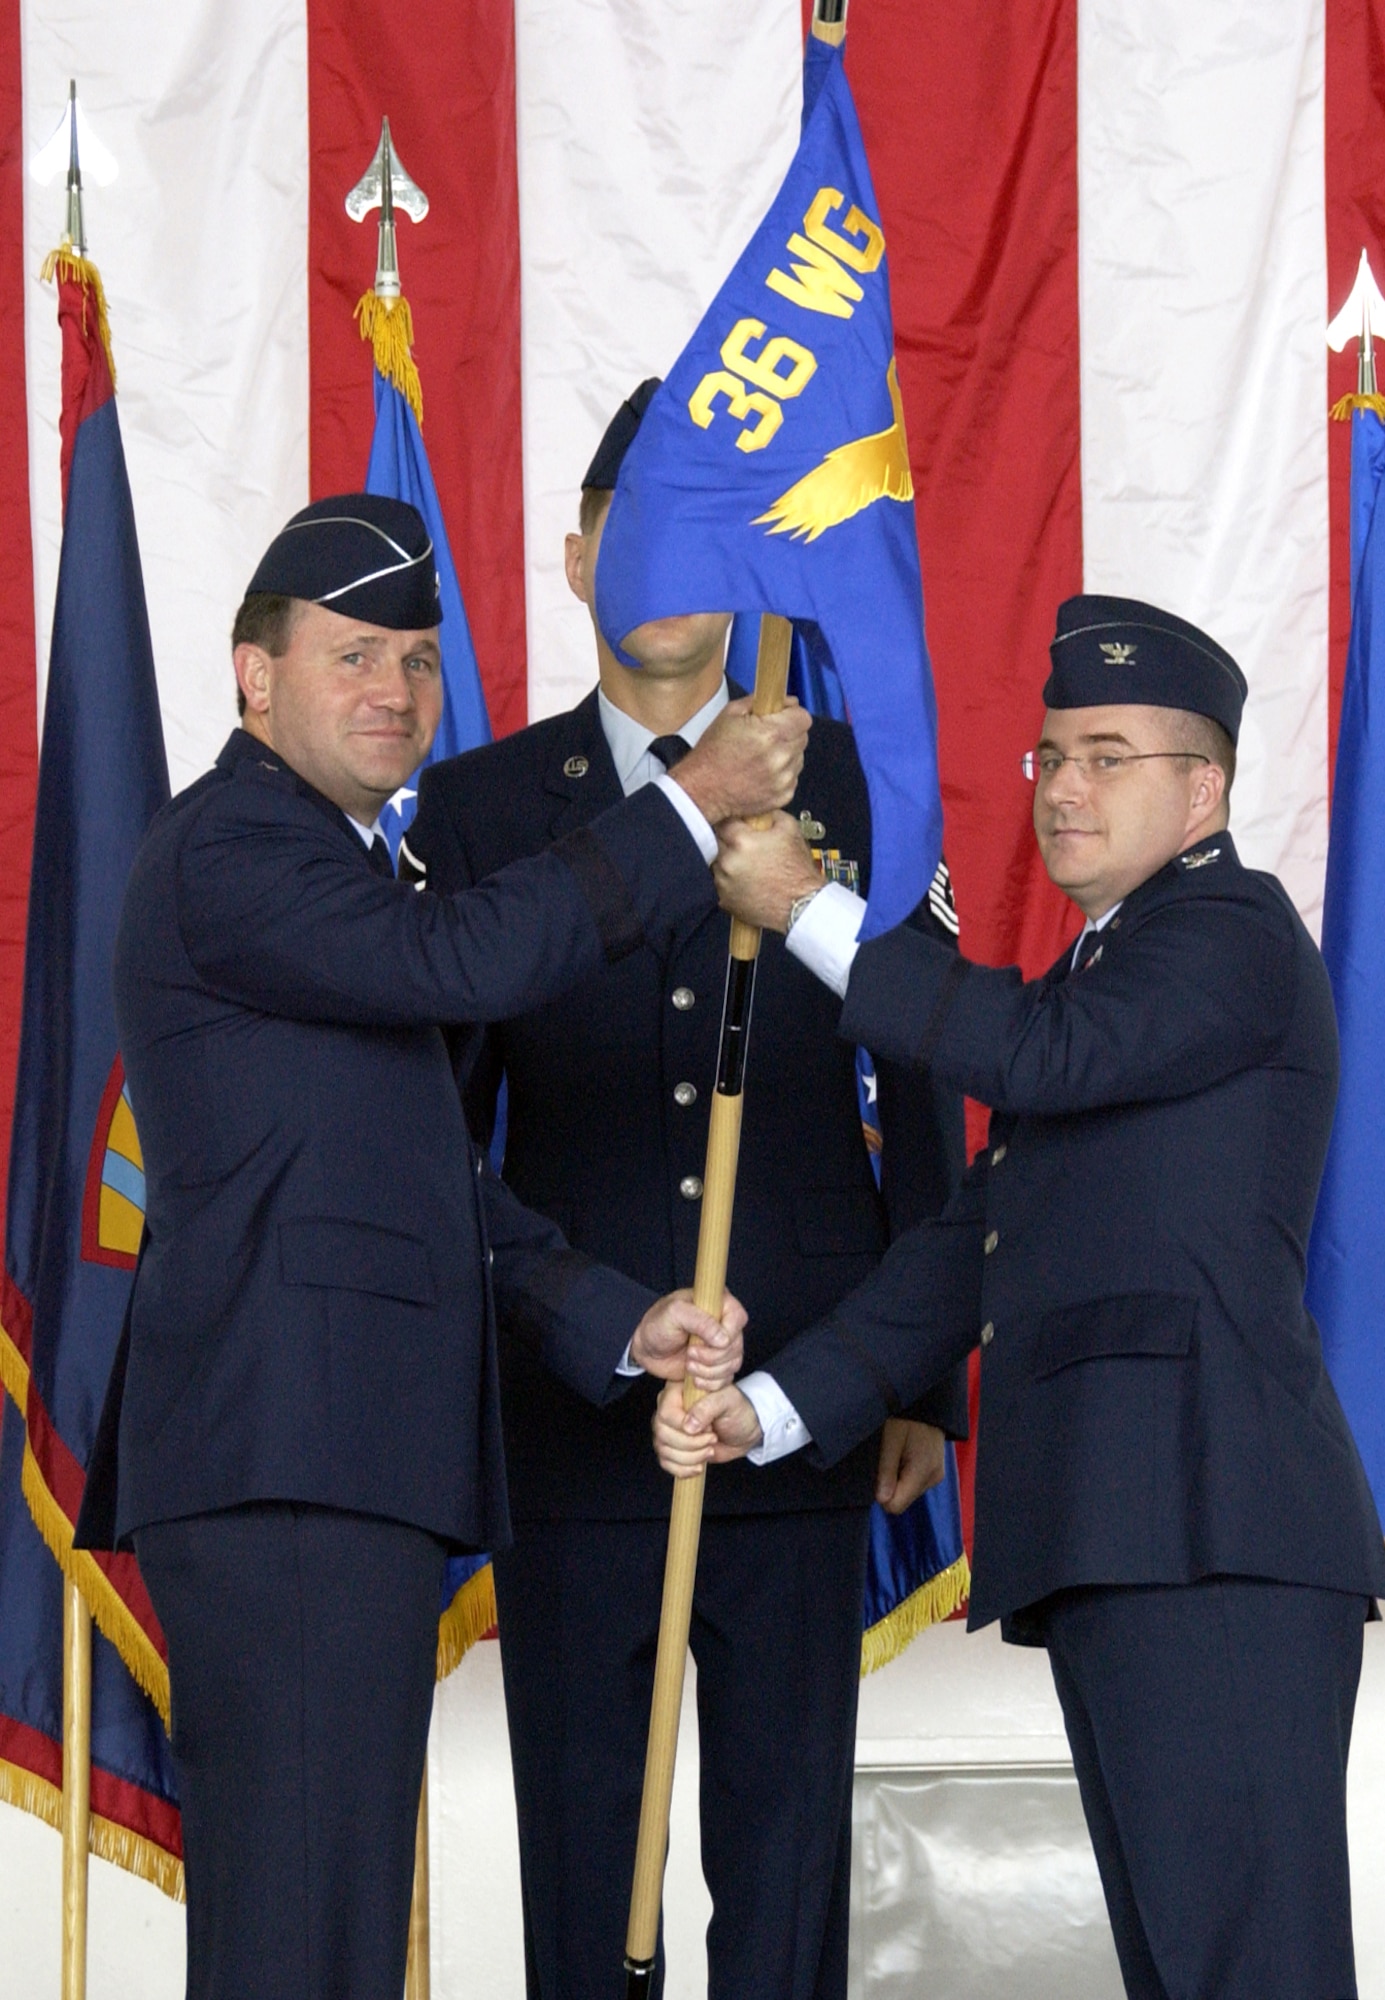 Col. Damian J. McCarthy assumed command of the 36th Operations Group in a ceremony Monday in a ceremony presided over by Brig. Gen. Douglas Owens, 36th Wing commander. (Photo by Airman 1st Class Daniel Owen/36th CS)